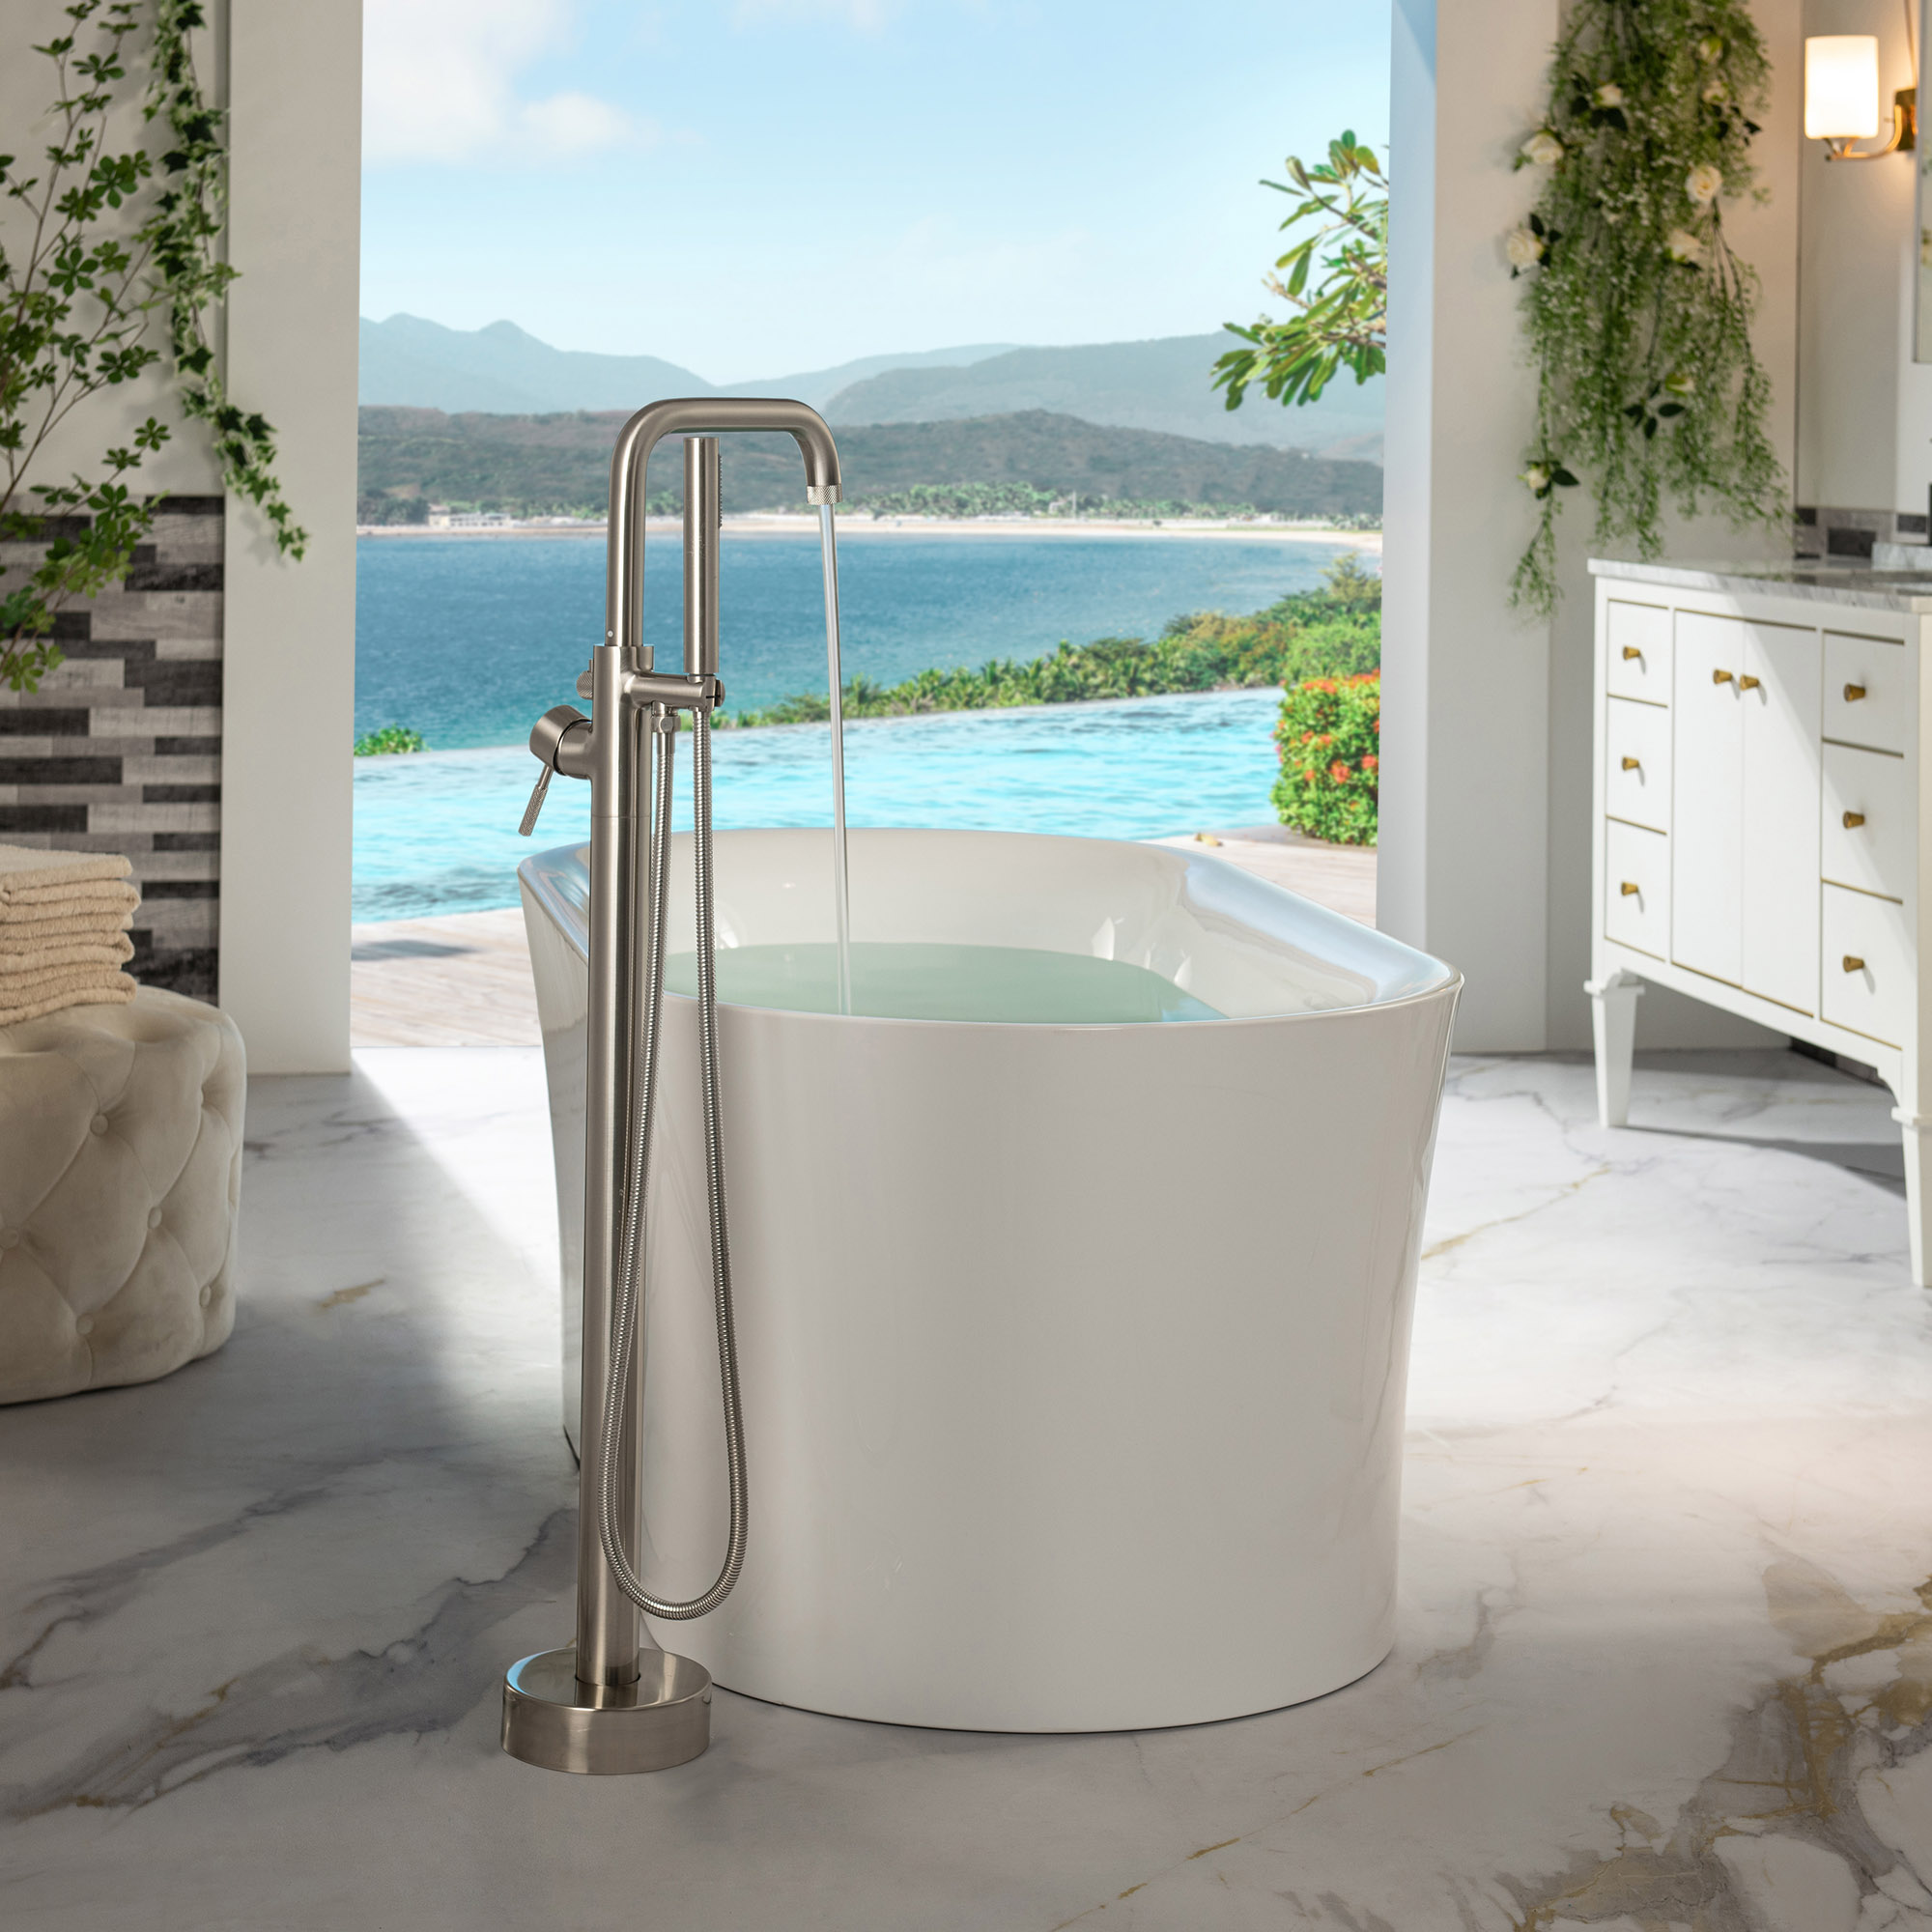  WOODBRIDGE F0070BNRD Contemporary Single Handle Floor Mount Freestanding Tub Filler Faucet with Cylinder Style Hand Shower in Brushed Nickel Finish._14664